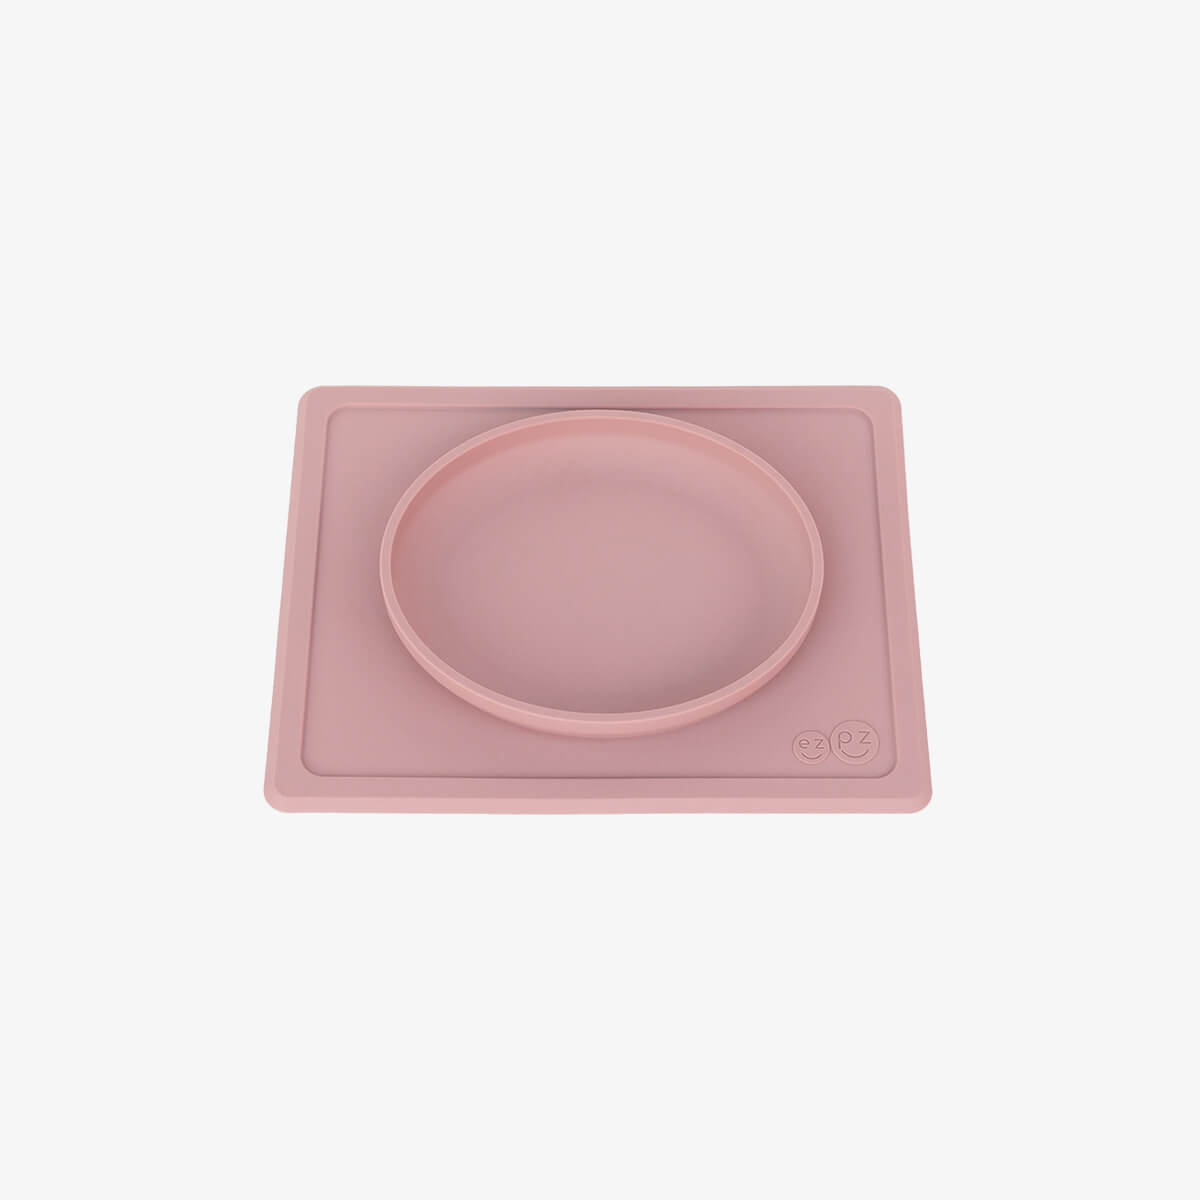 ezpz tiny plate in blush pink / silicone plate for babies that suctions to the highchair